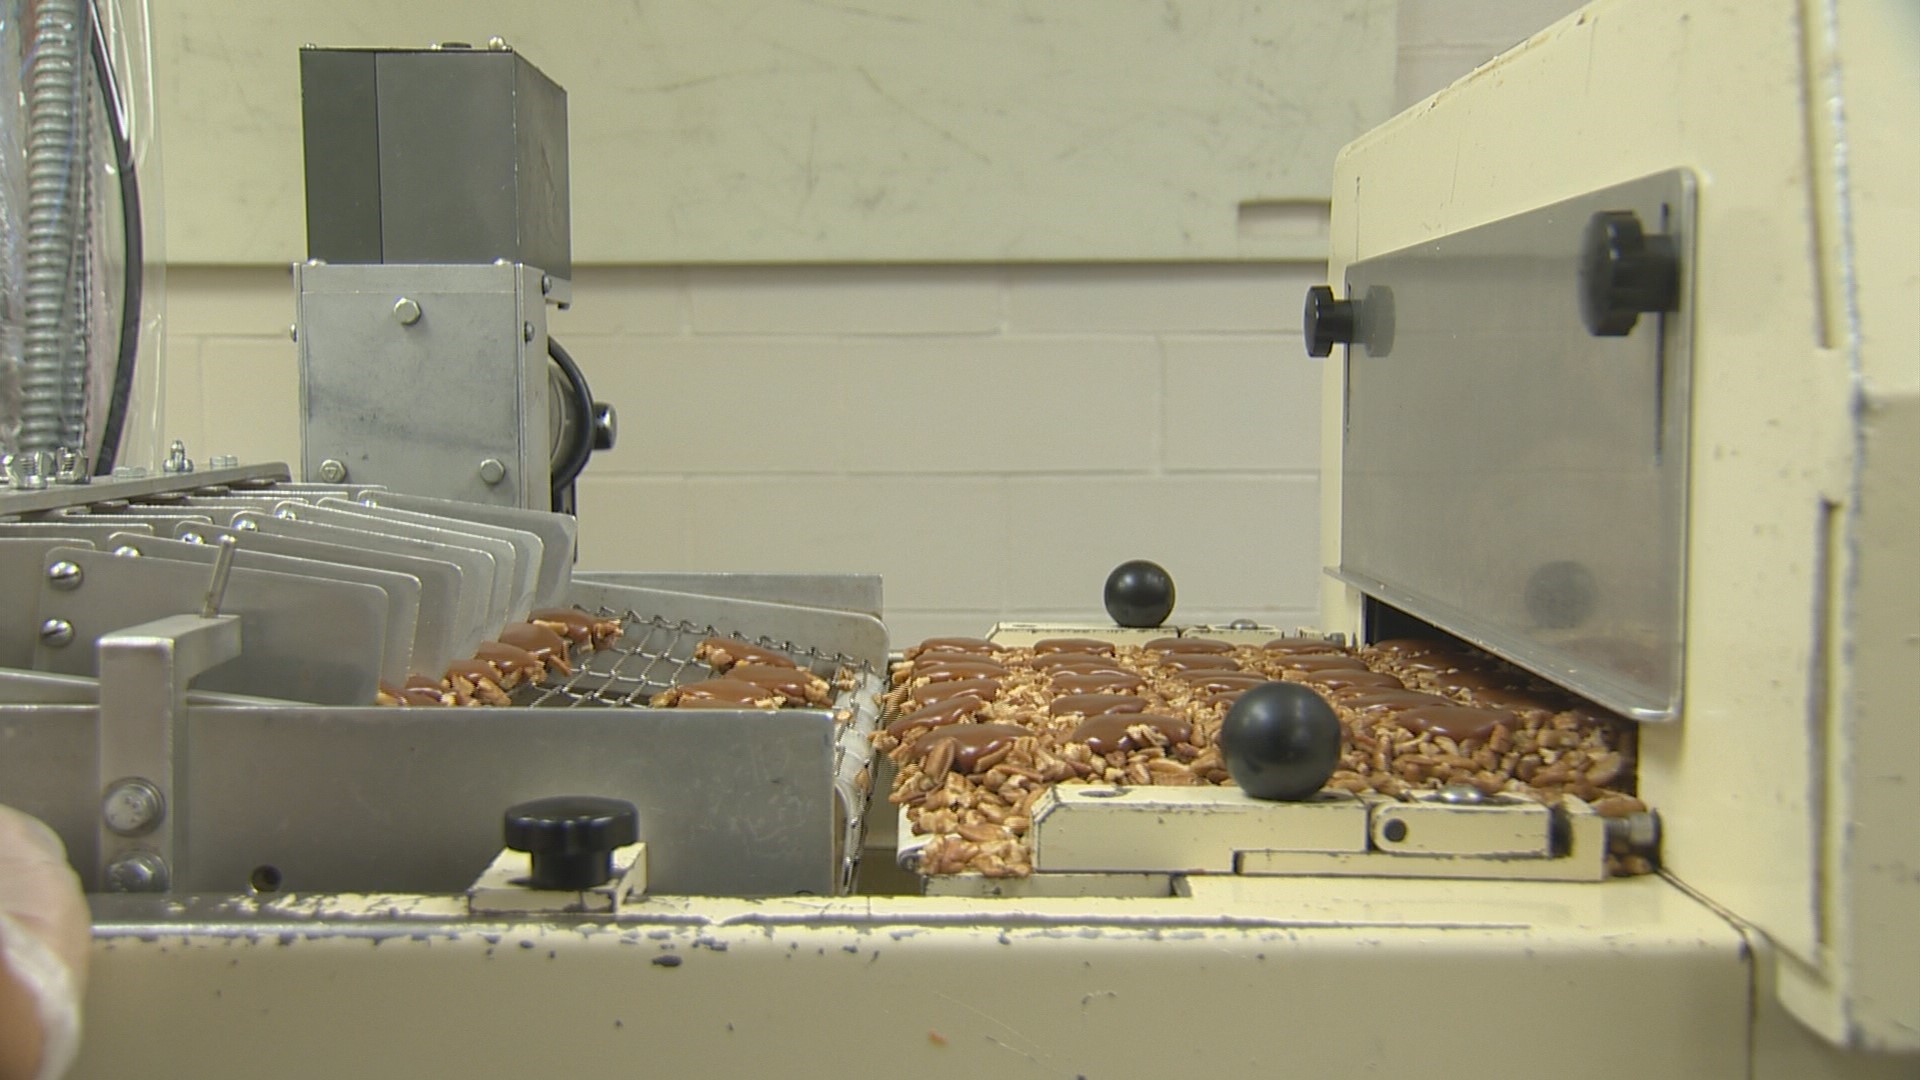 KVUE's Daybreak team is getting an inside look at what it takes to make some of the tastiest treats at Lammes Candies as part of the "Take This Job" series .